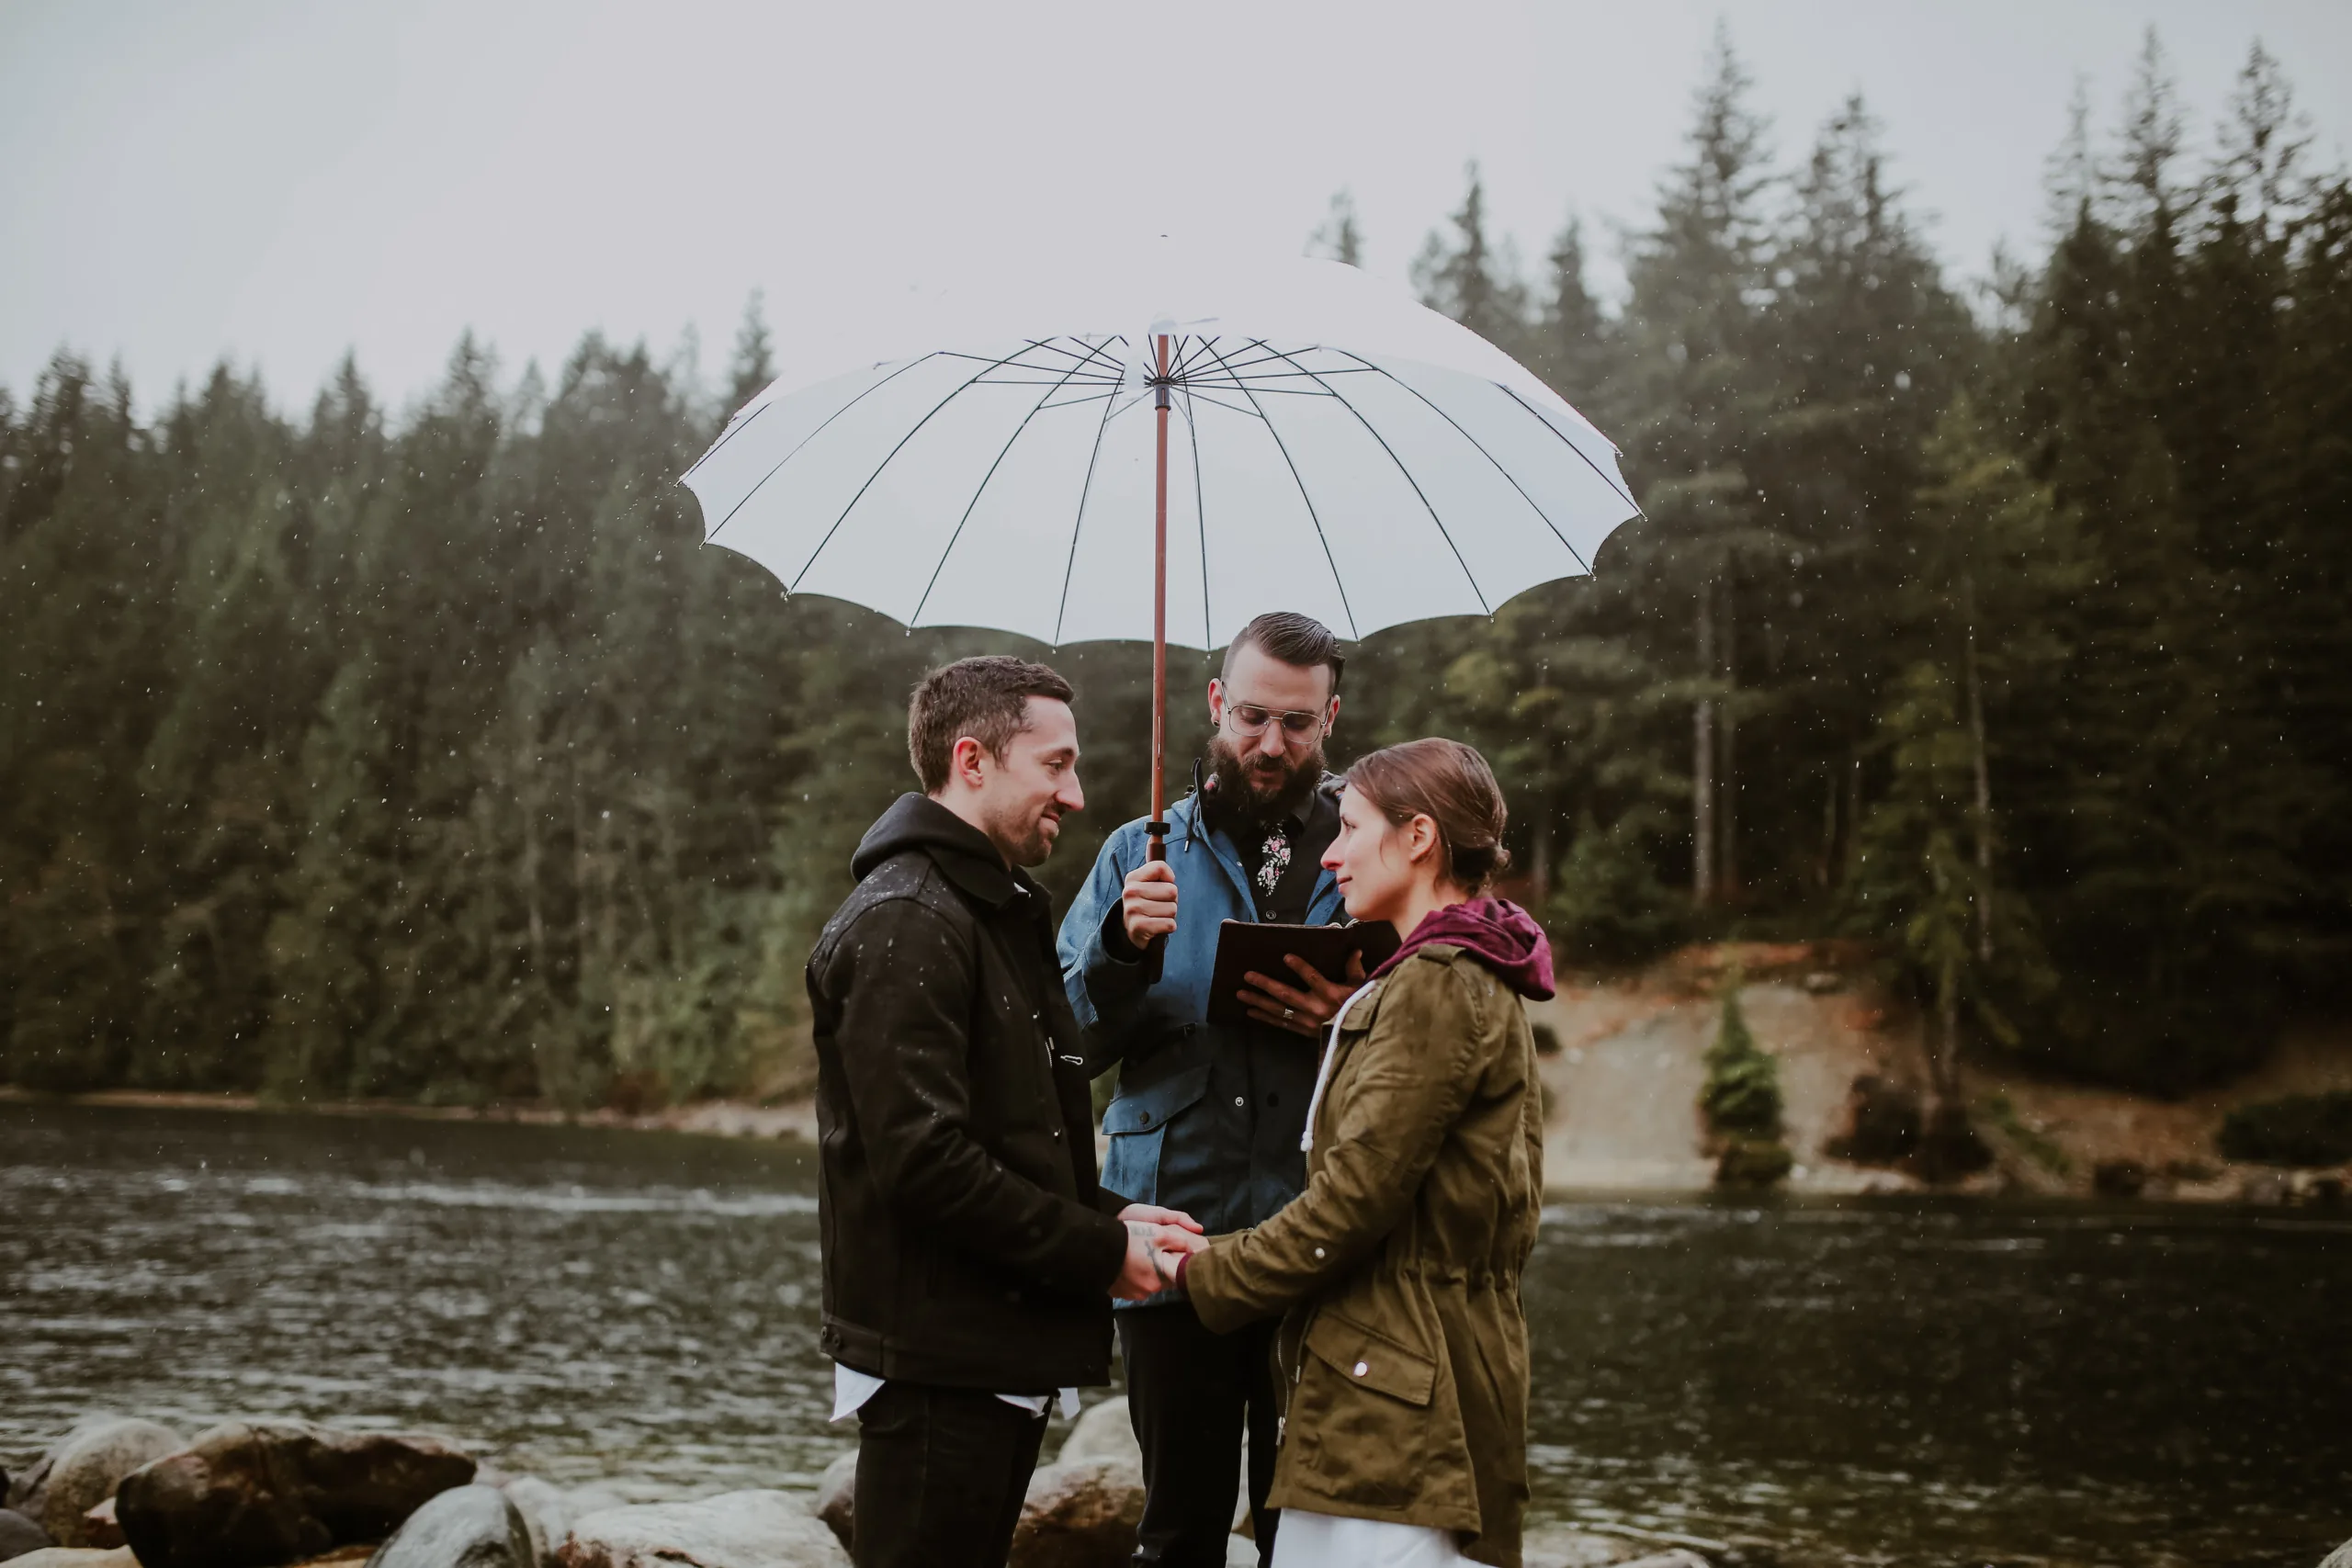 Young Hip and Married elopement ceremony with umbrellas on a rainy wedding day